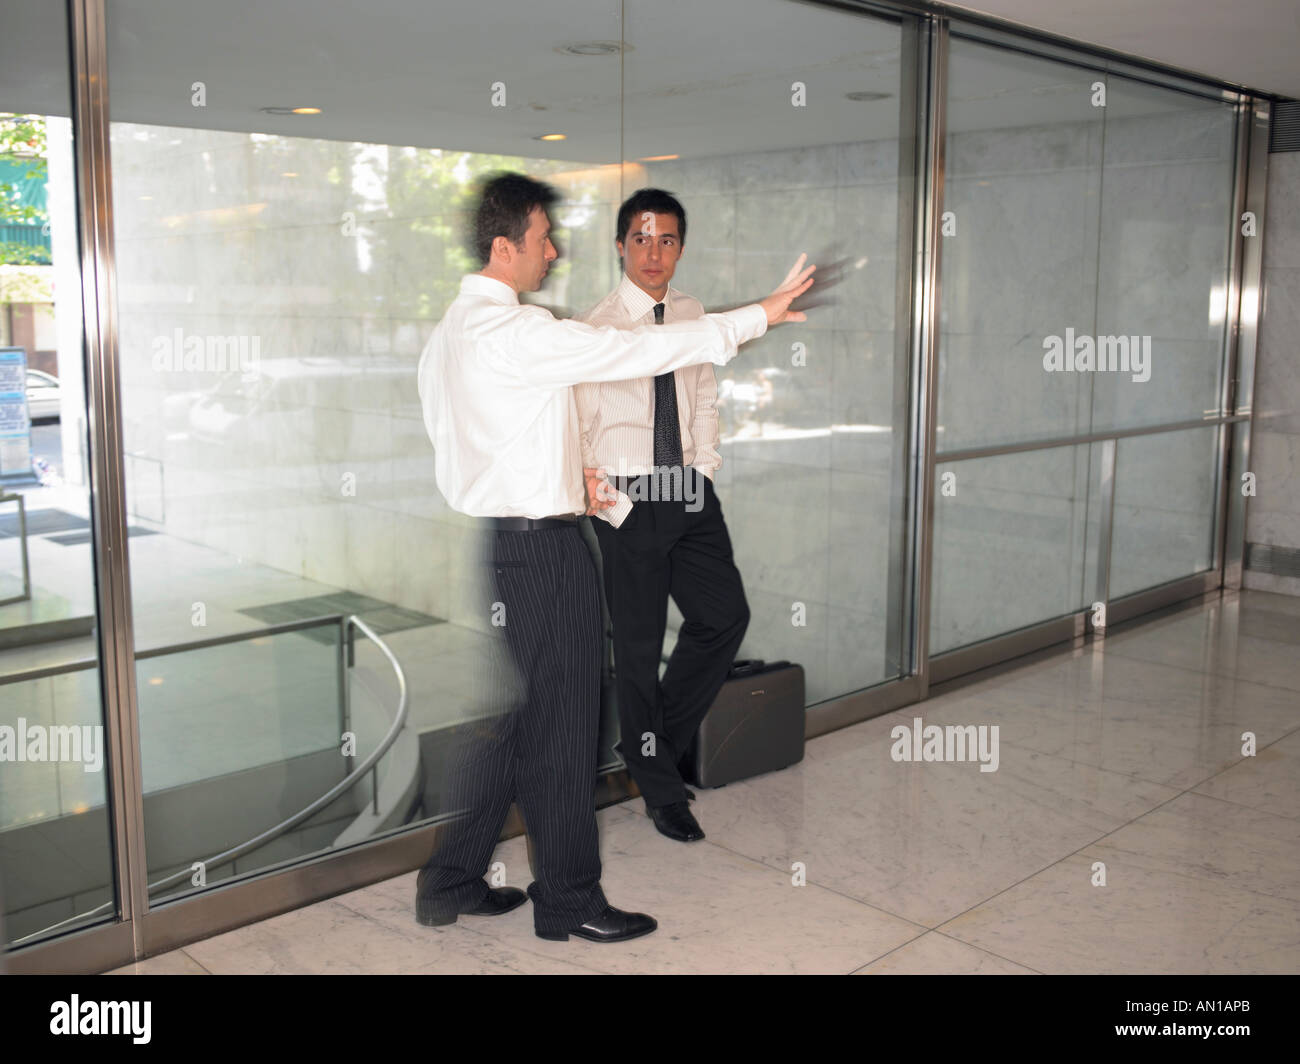 Men conferring in front of a glass window Stock Photo